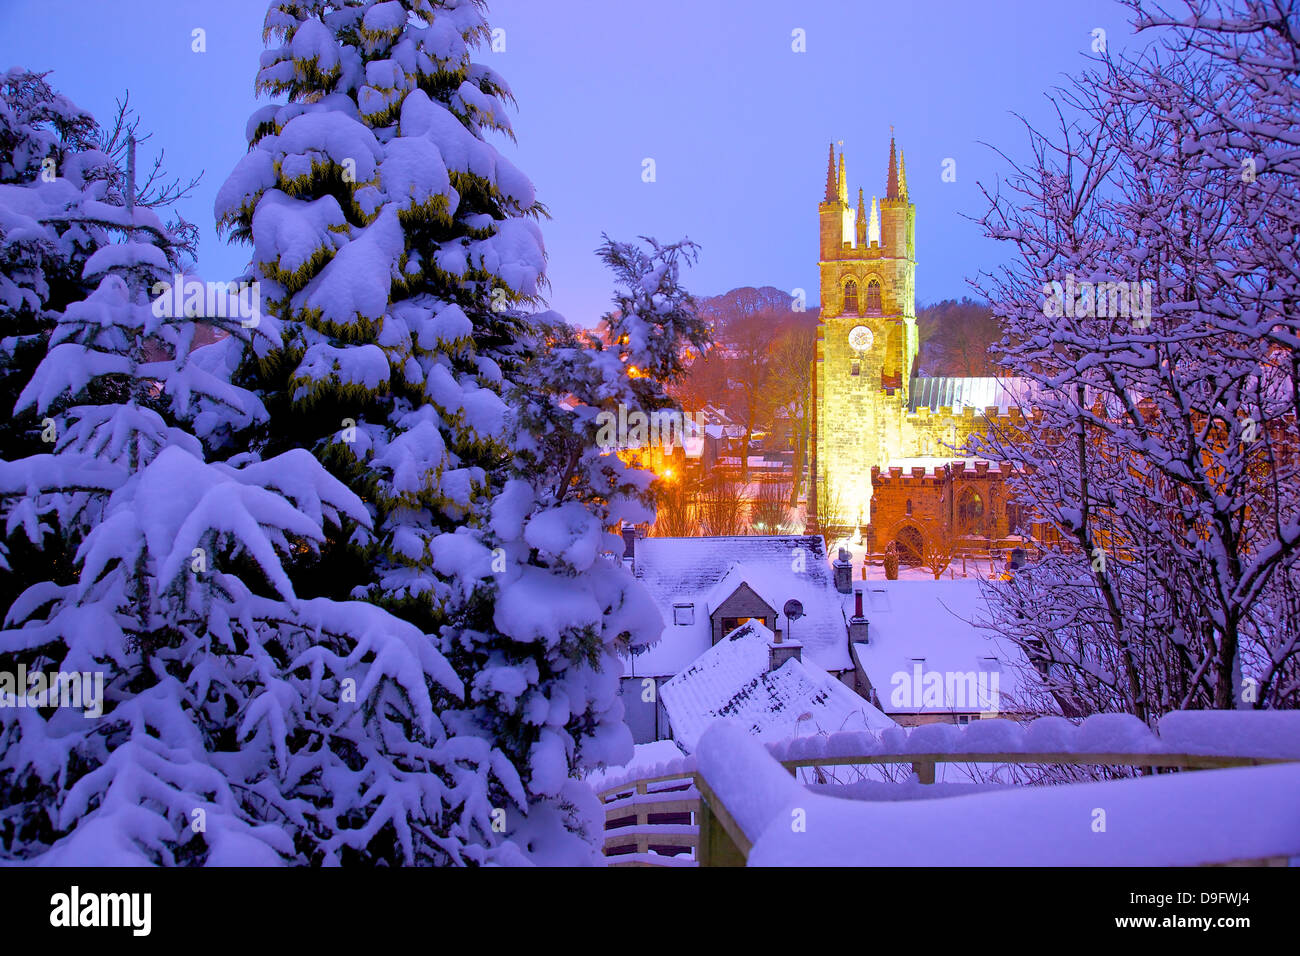 Cathedral of the Peak in snow, Tideswell, Peak District National Park, Derbyshire, England, UK Stock Photo